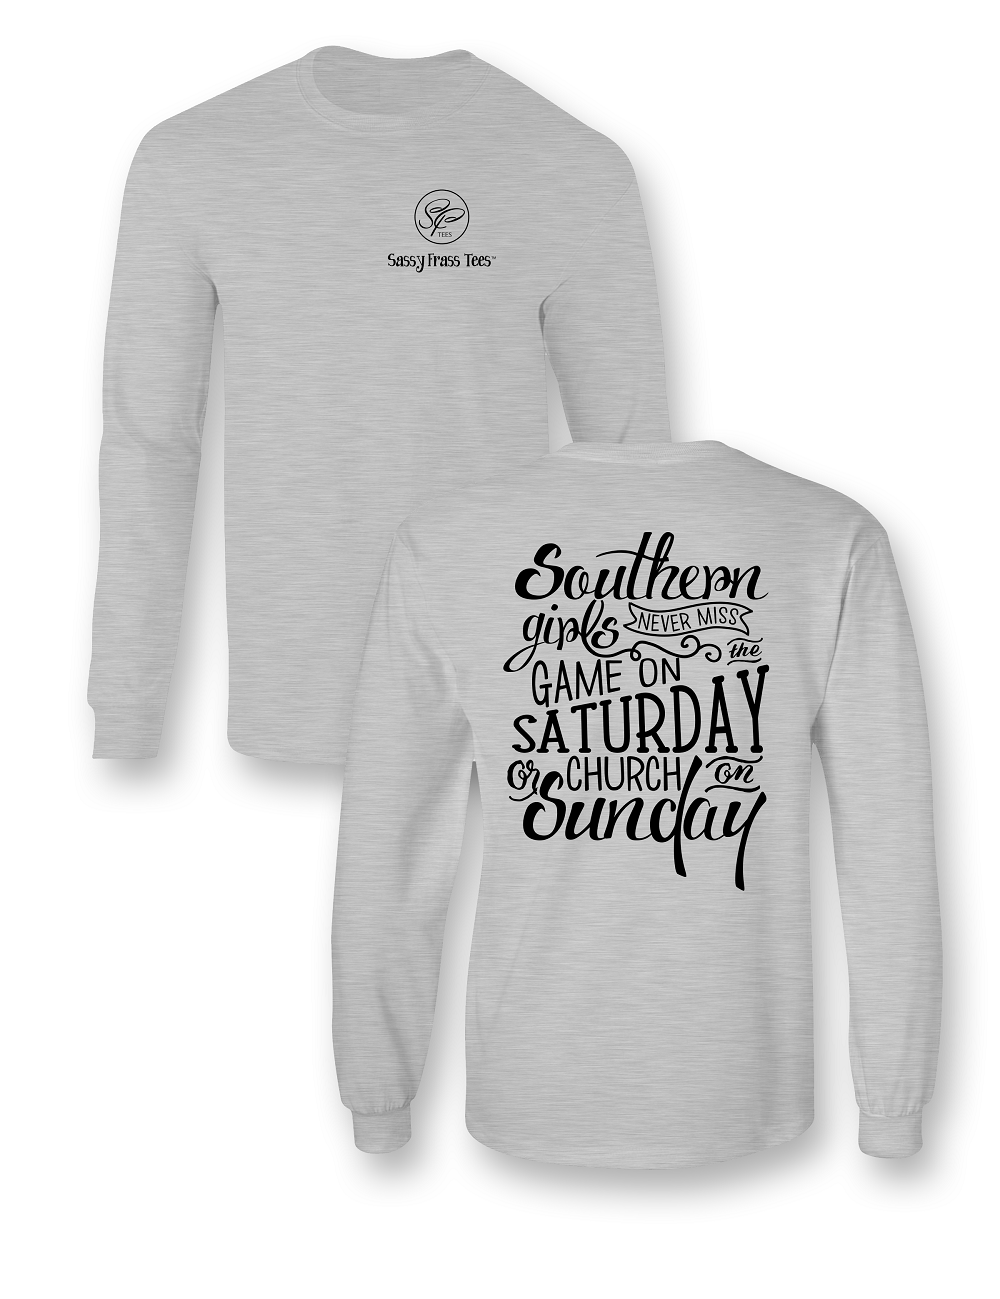 SALE Sassy Frass Southern Girls Game on Saturday Church on Sunday Long Sleeve Bright Girlie T Shirt